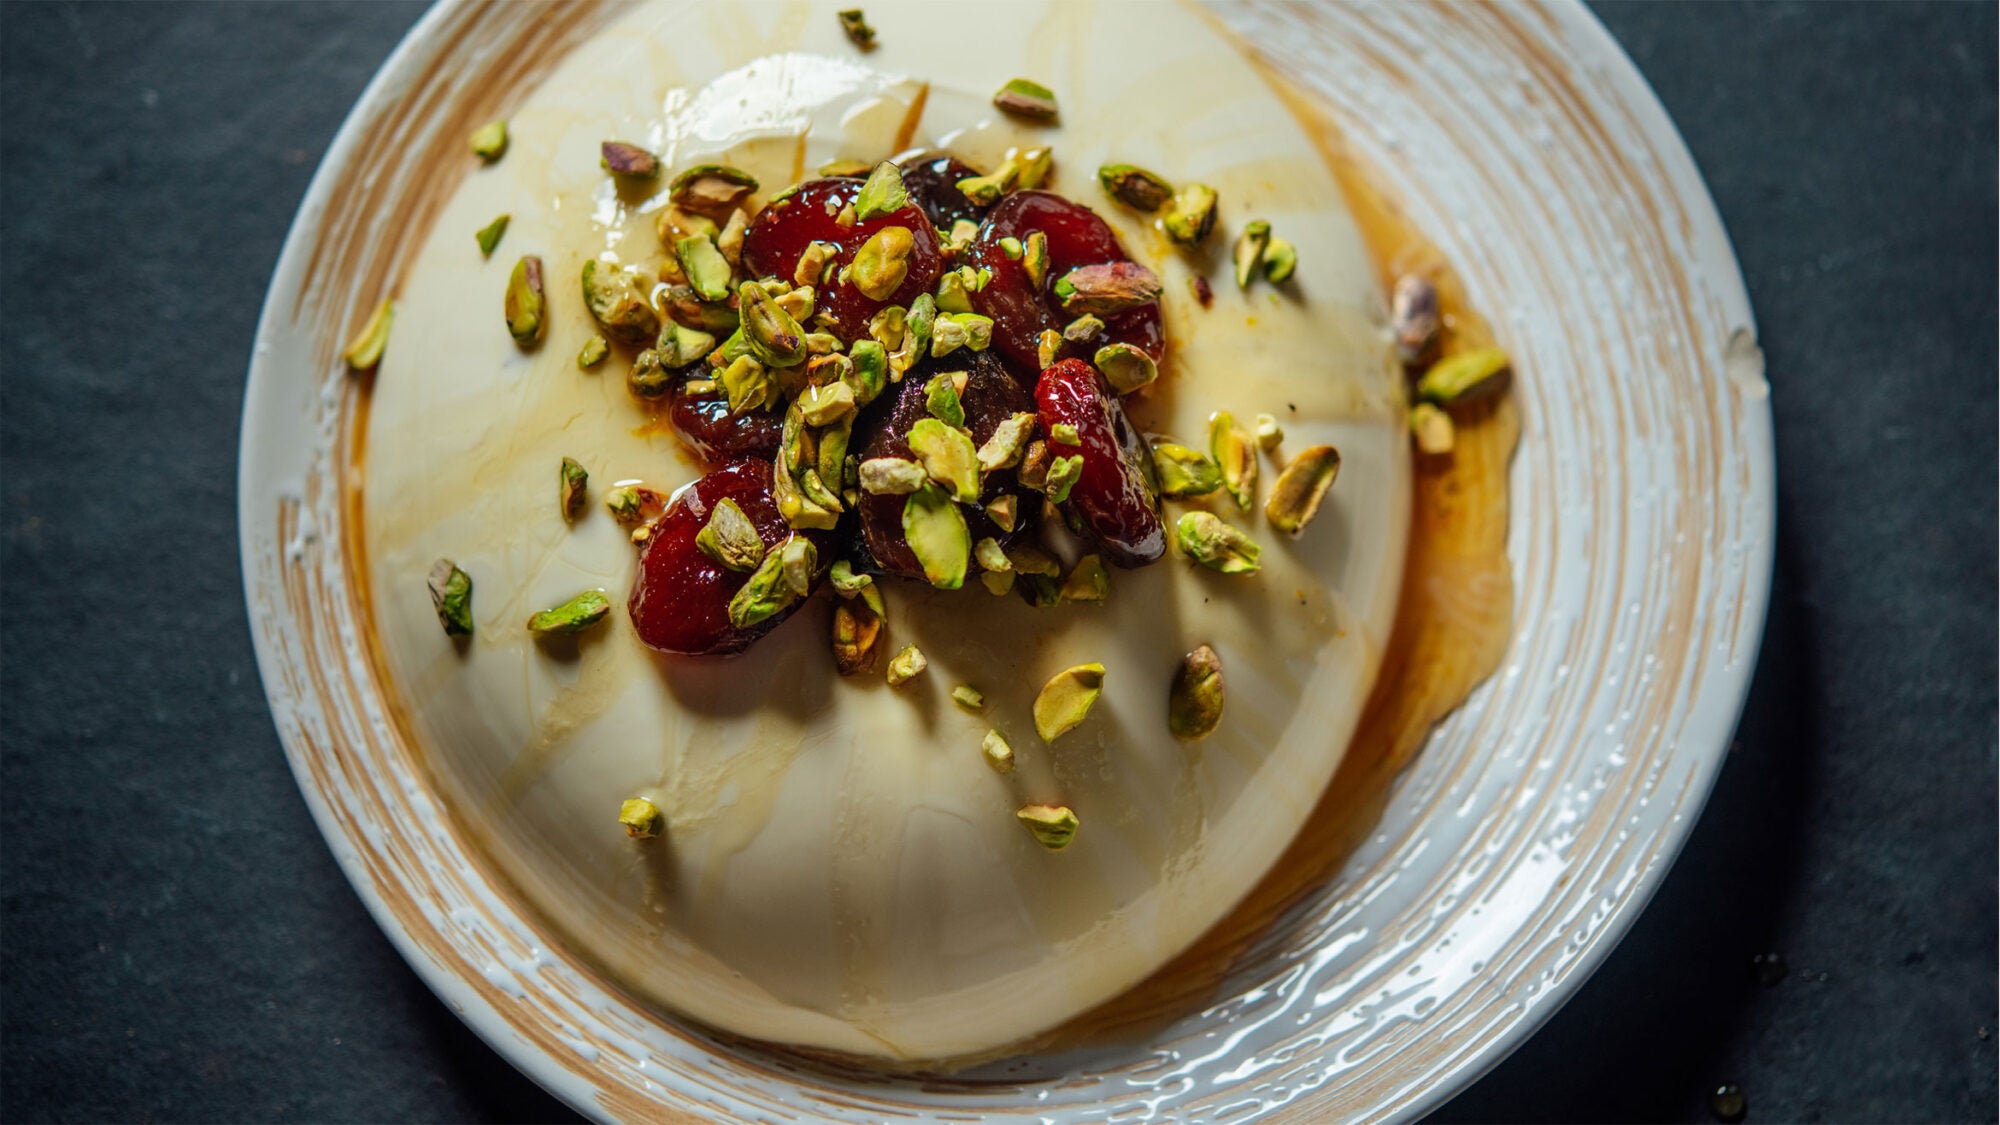 Article-Panna-Cotta-Stewed-Apricot-Fruit-and-Pistachios